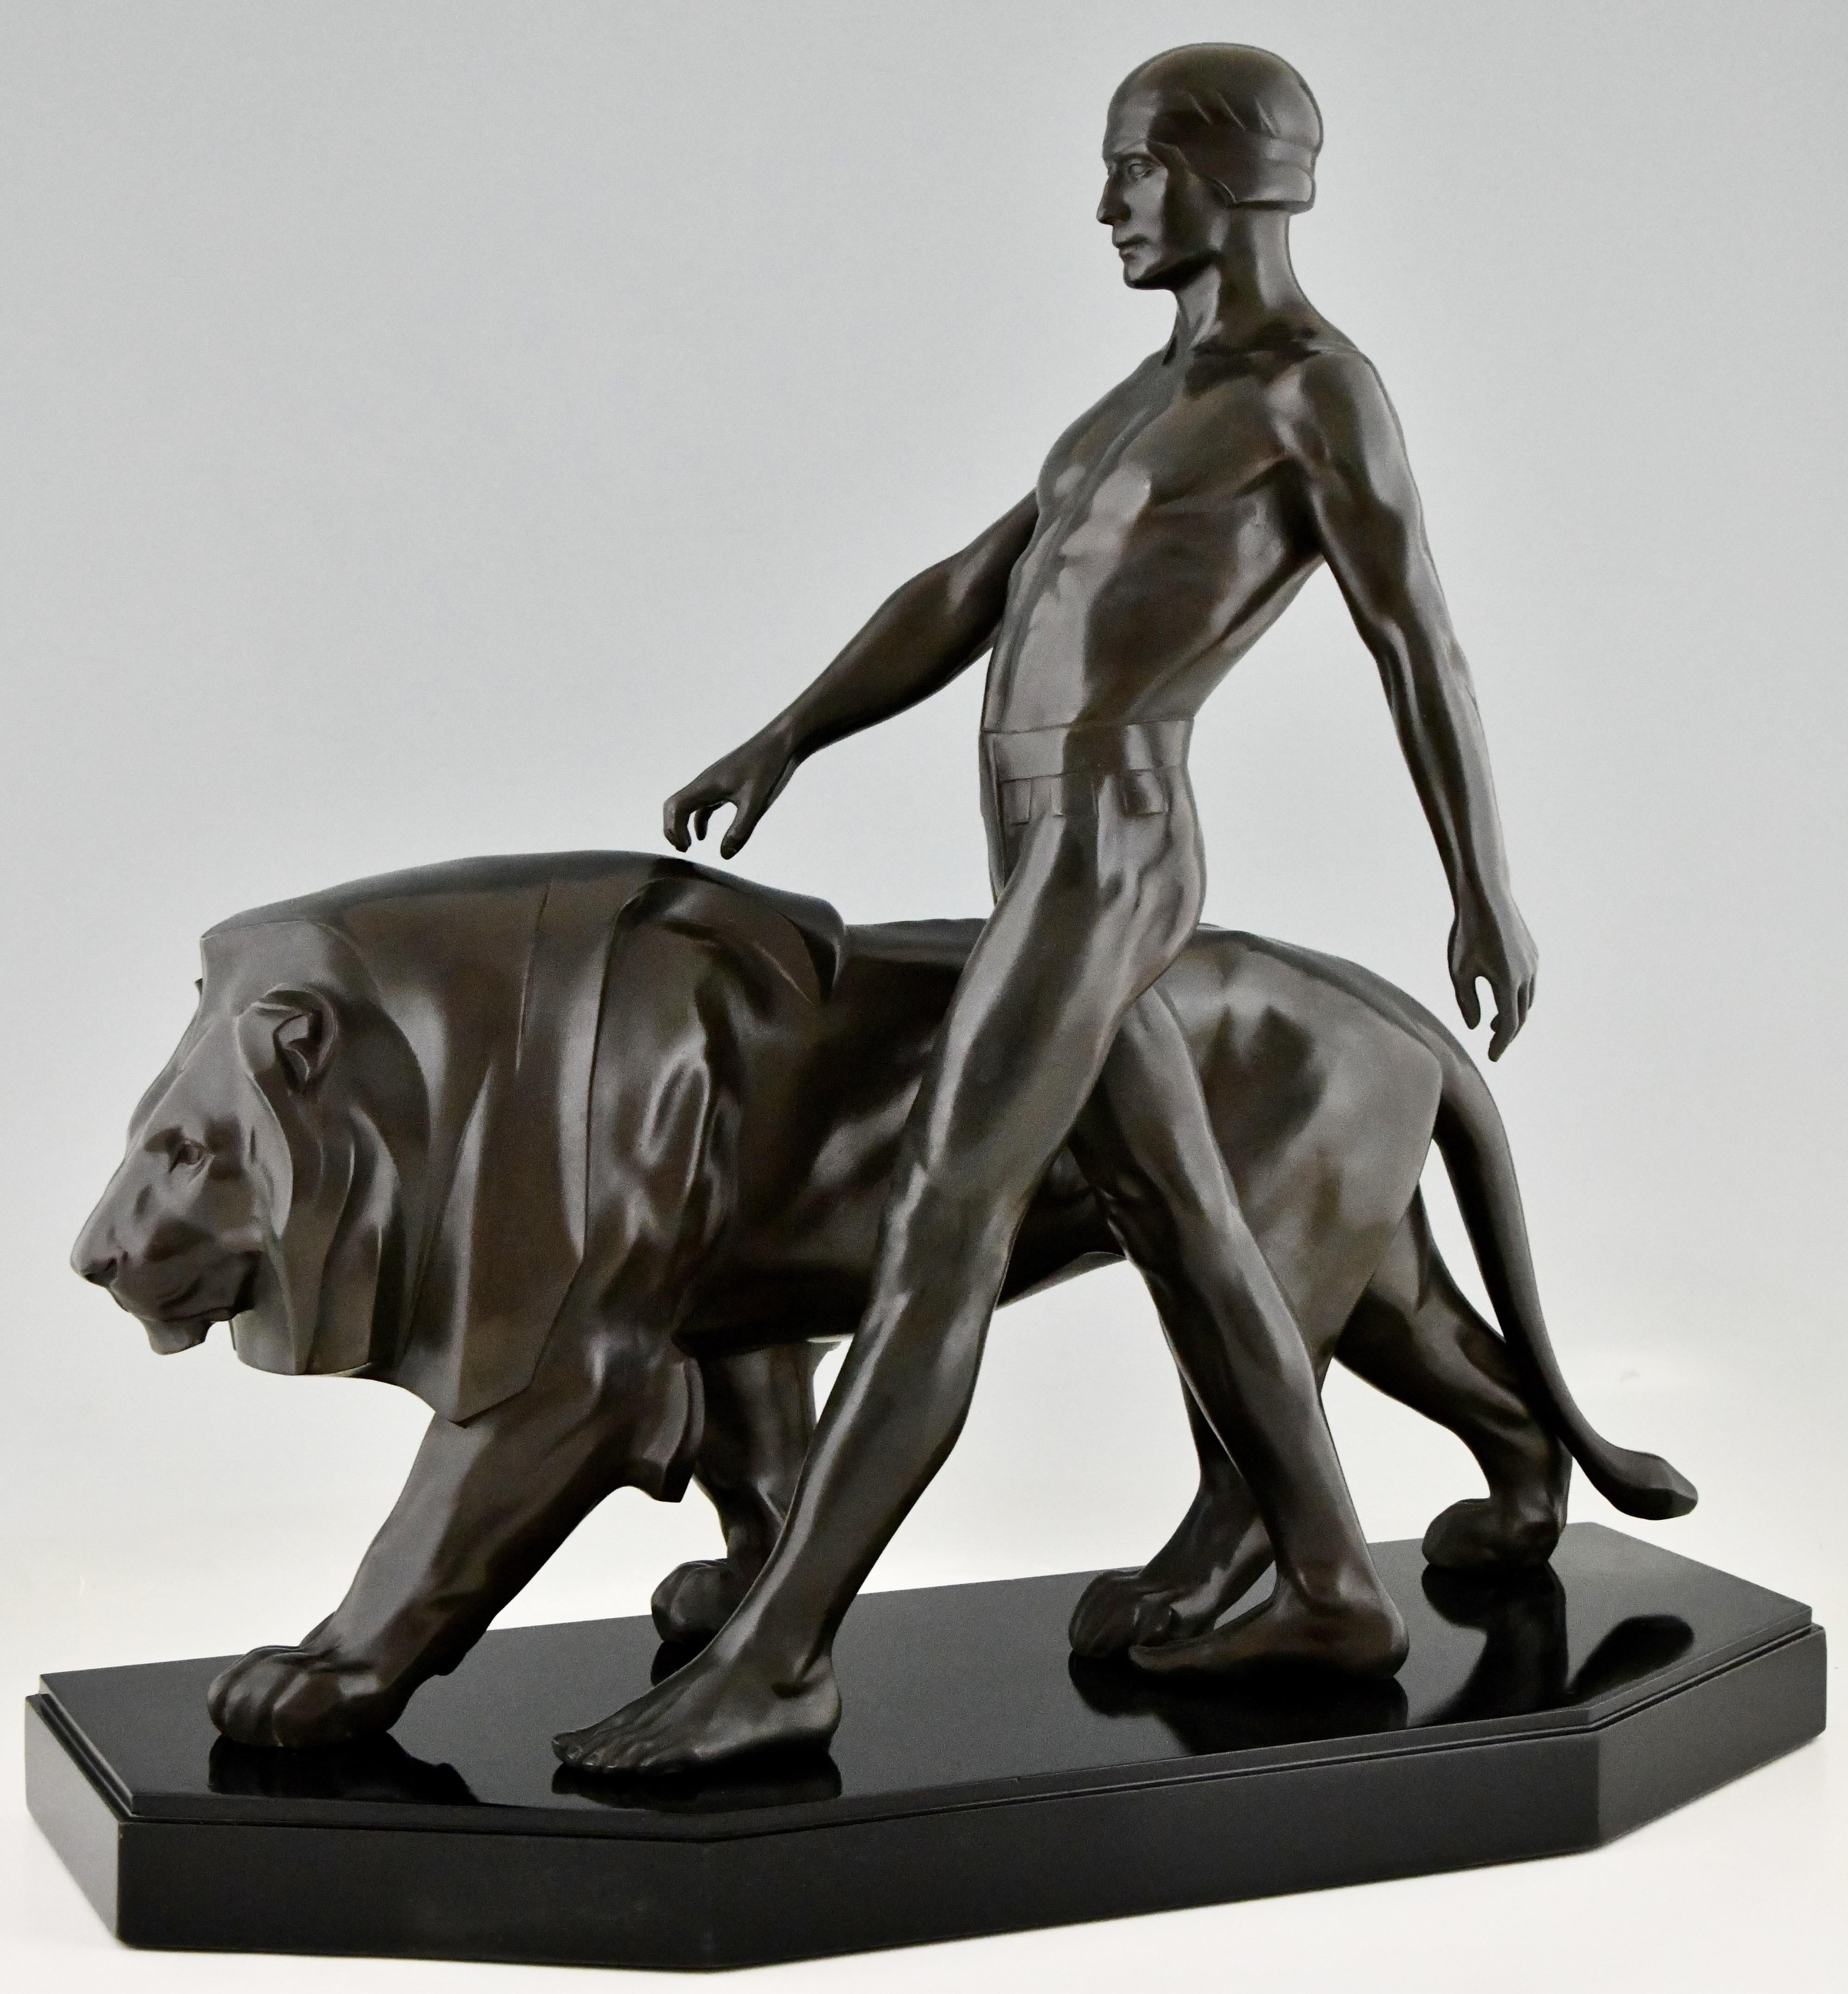 Art Deco sculpture of a male nude walking with lion. Belluaire, Art Deco sculpture modelled as an athletic male walking alongside a stylized lion signed by Max Le Verrier. France ca. 1925. Patinated Art metal on a Belgian Black marble base.